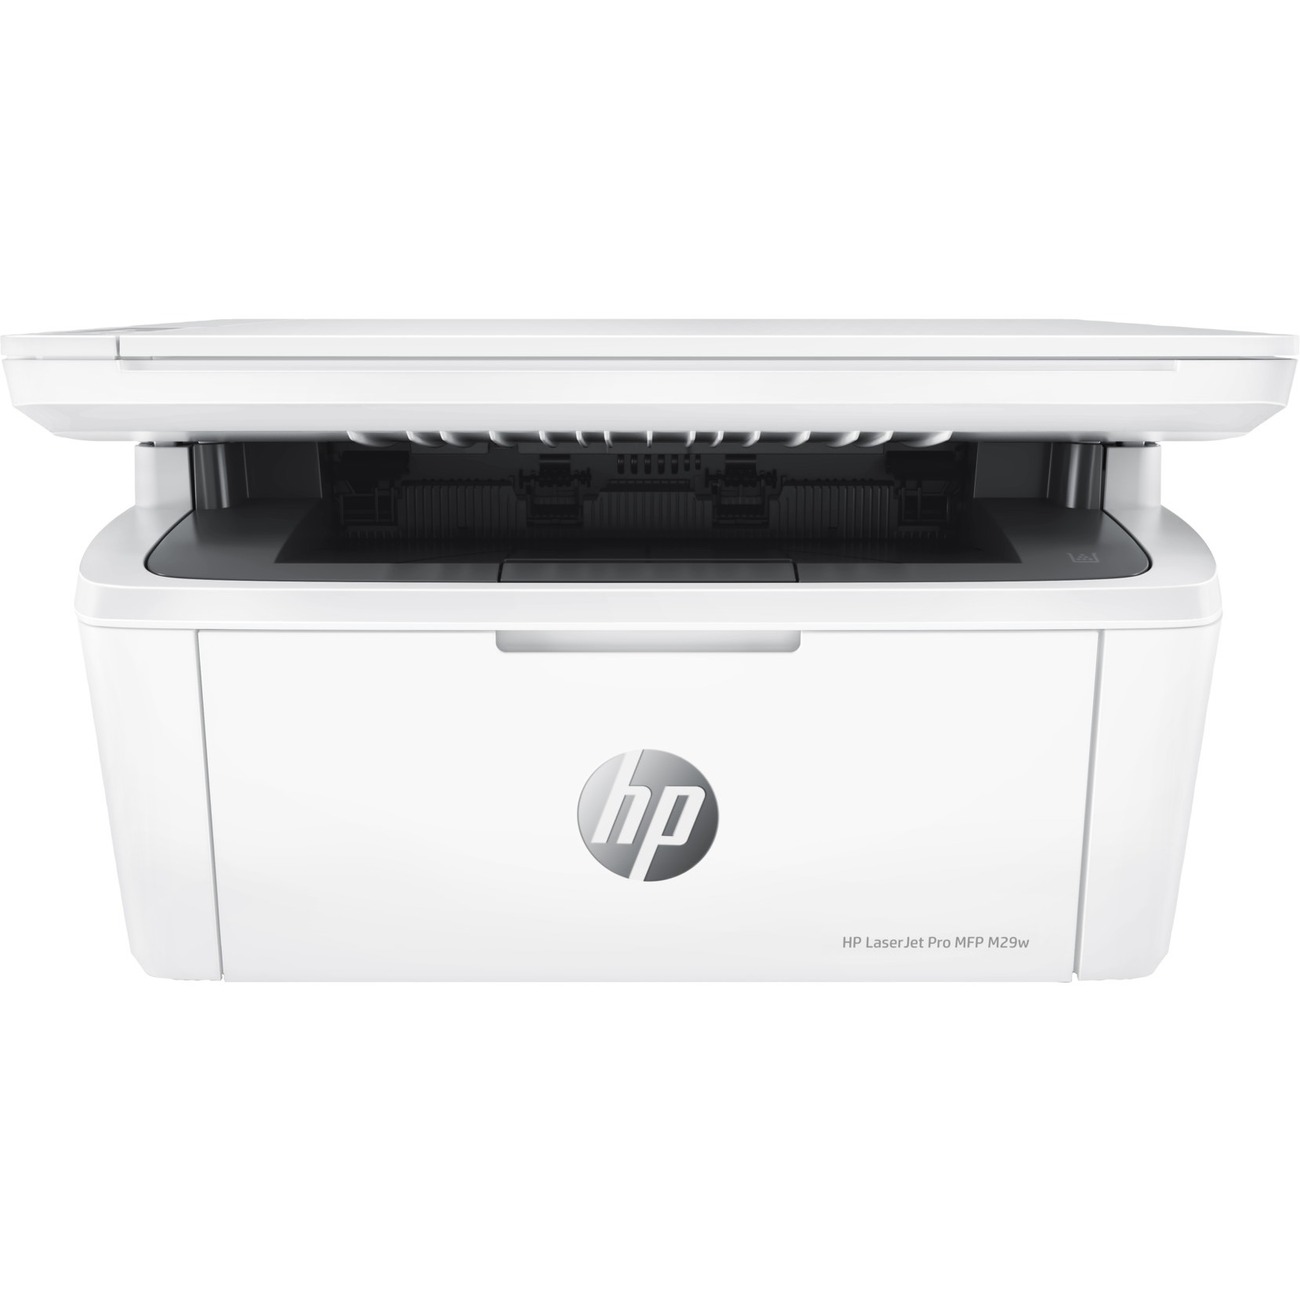 Hp Laserjet P1000 Series Getting Started Guide